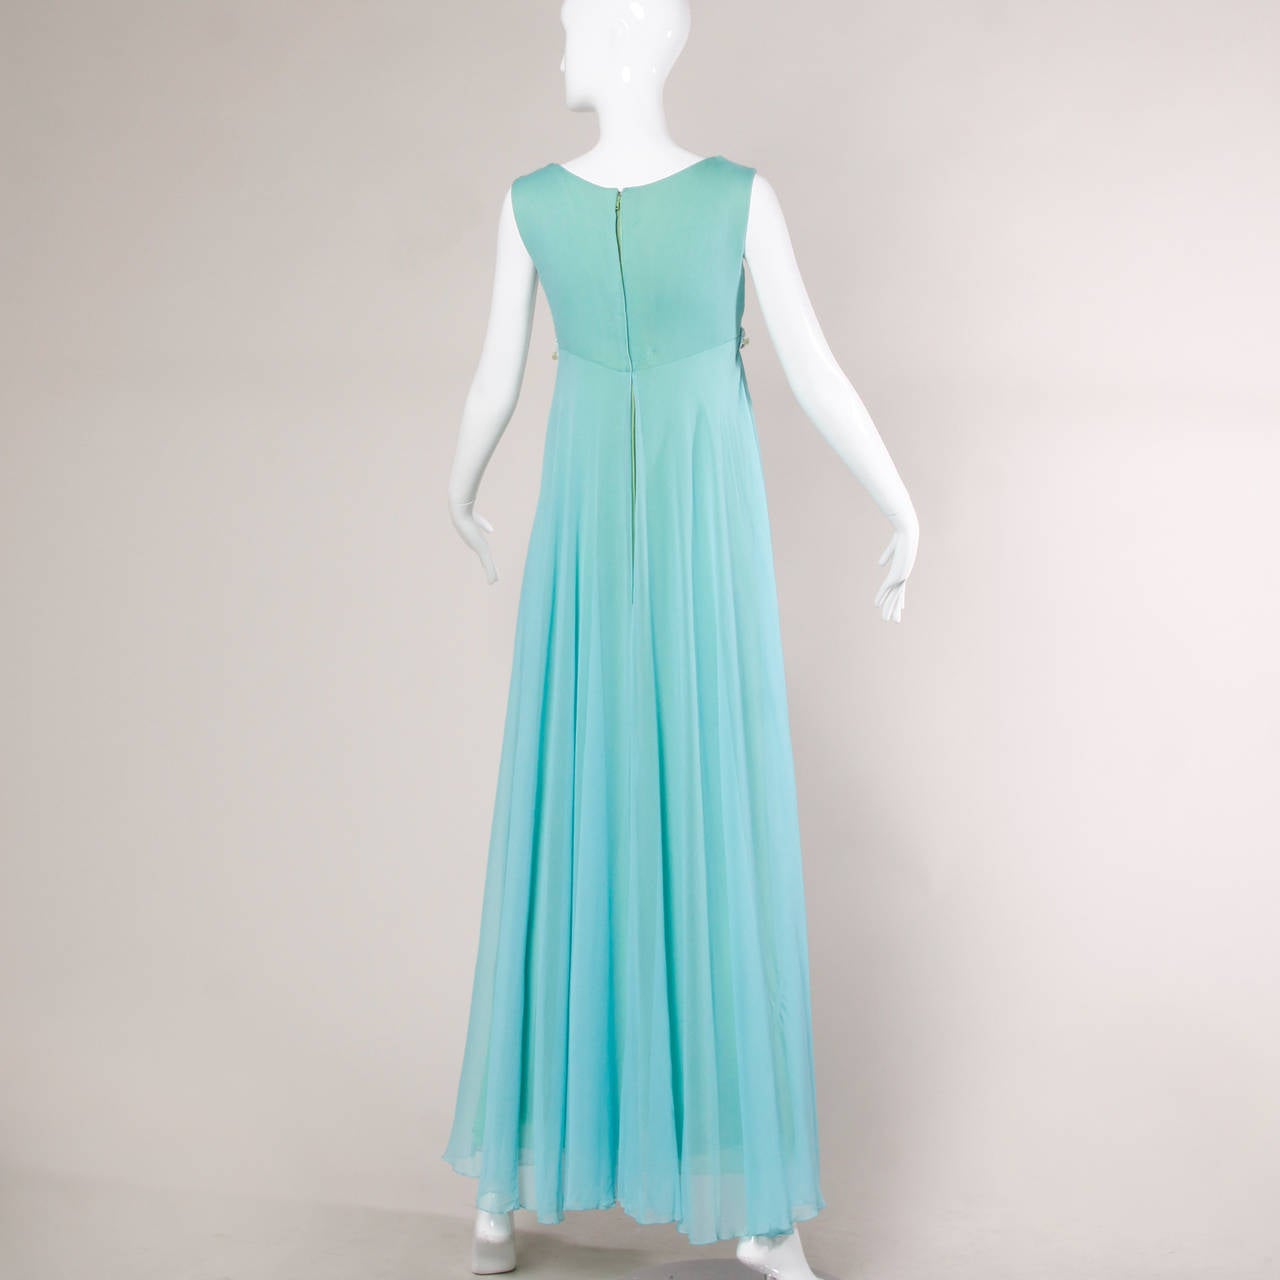 1971 Unworn Beaded Color Block Gown with Original Tags Attached 1